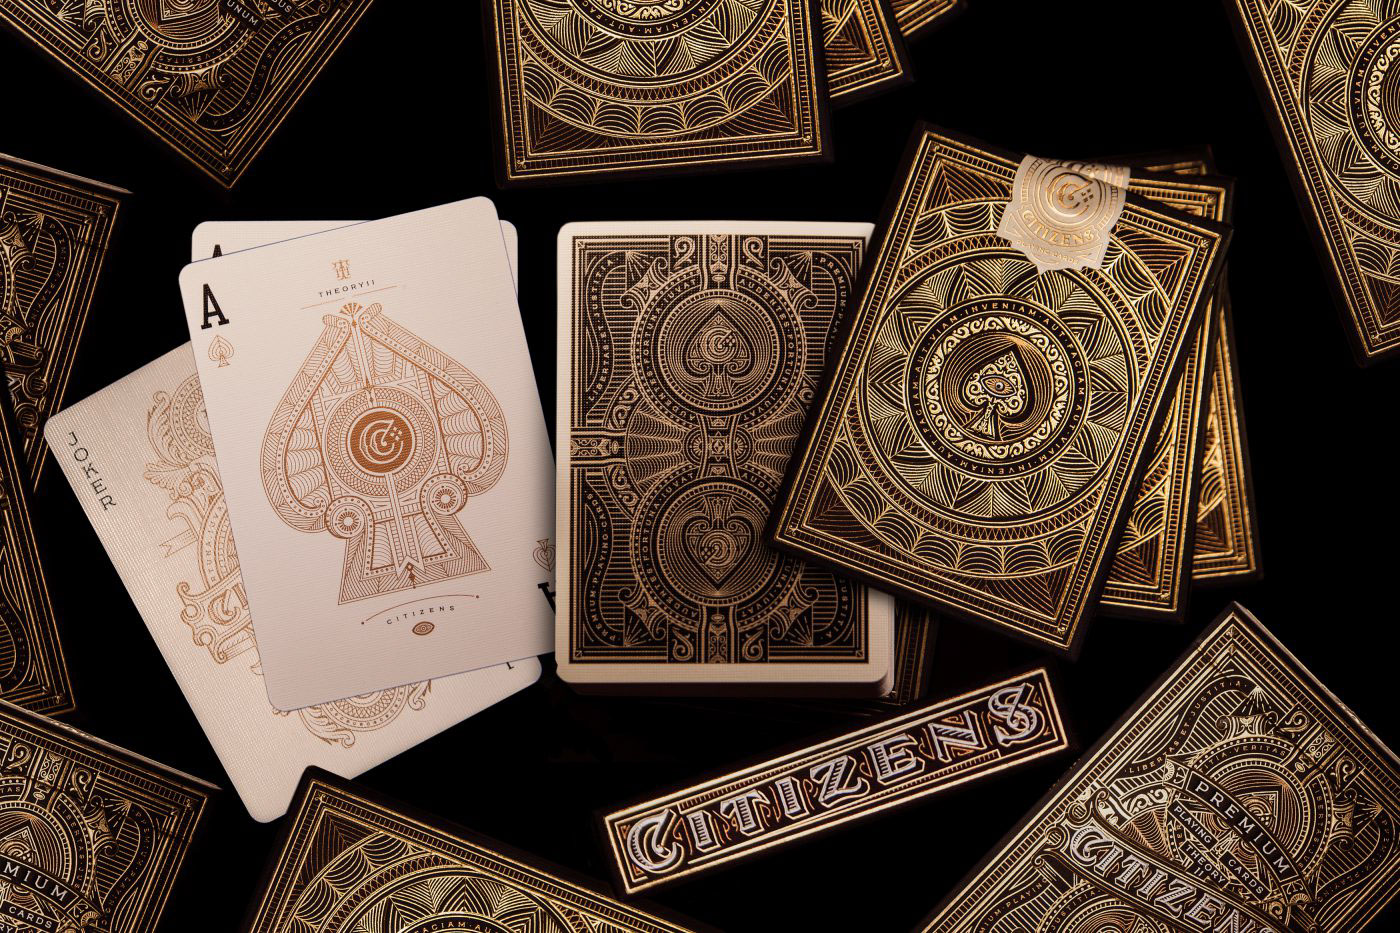 Kevin Cantrell Kevin Cantrell Design theory11 Citizens Playing Cards Playing Cards packaging design playing card design gold foil hot stamping luxury laser-etched Guilloché pattern engraving &reach Satellite Office